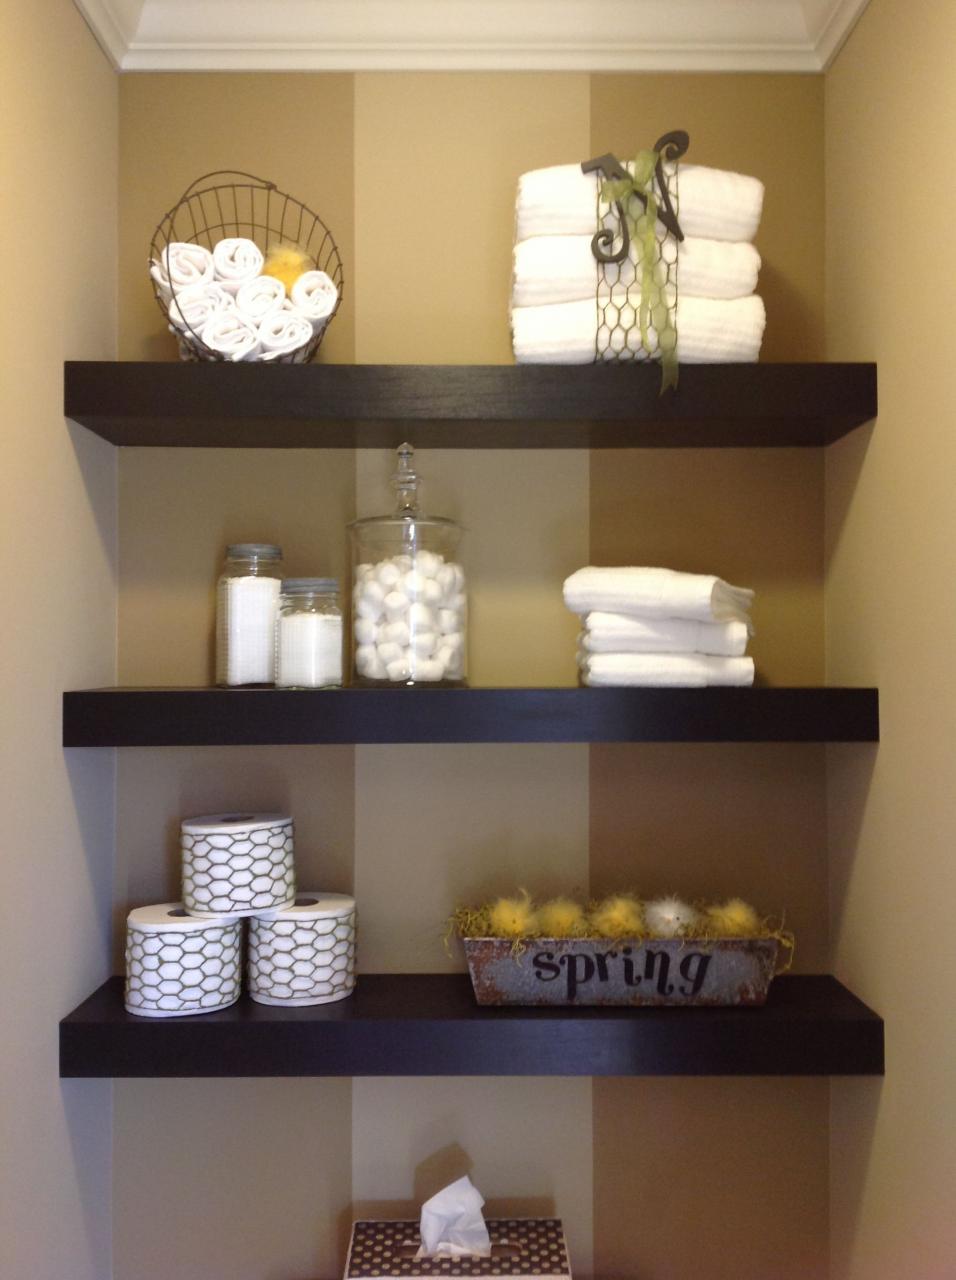 Pin by Courtney Kirk on CHECK OUT OUR LATEST PROJECTS! Bathroom shelf